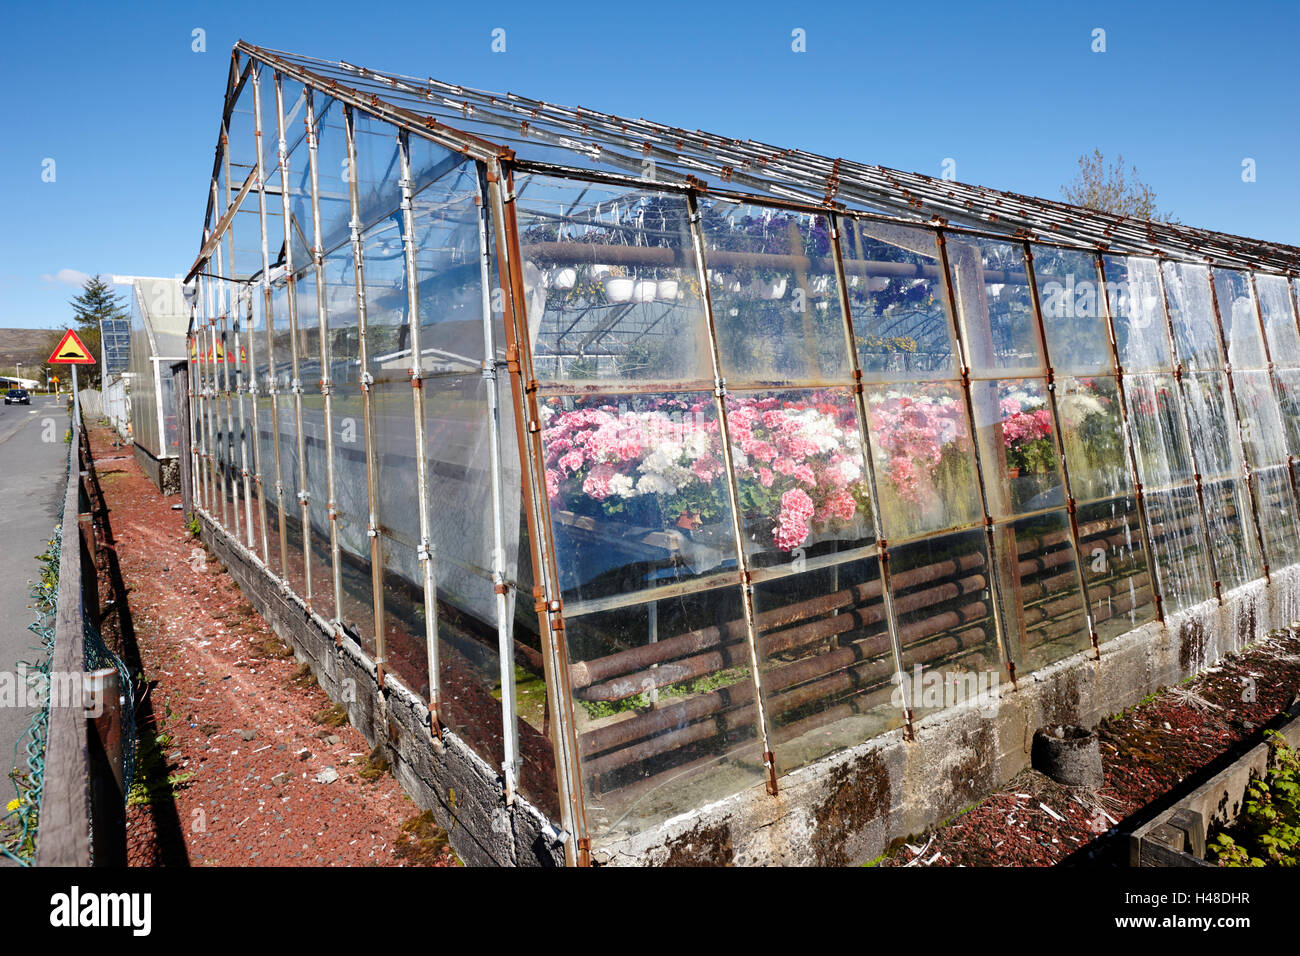 geothermally powered greenhouses in hveragerdi Iceland Stock Photo